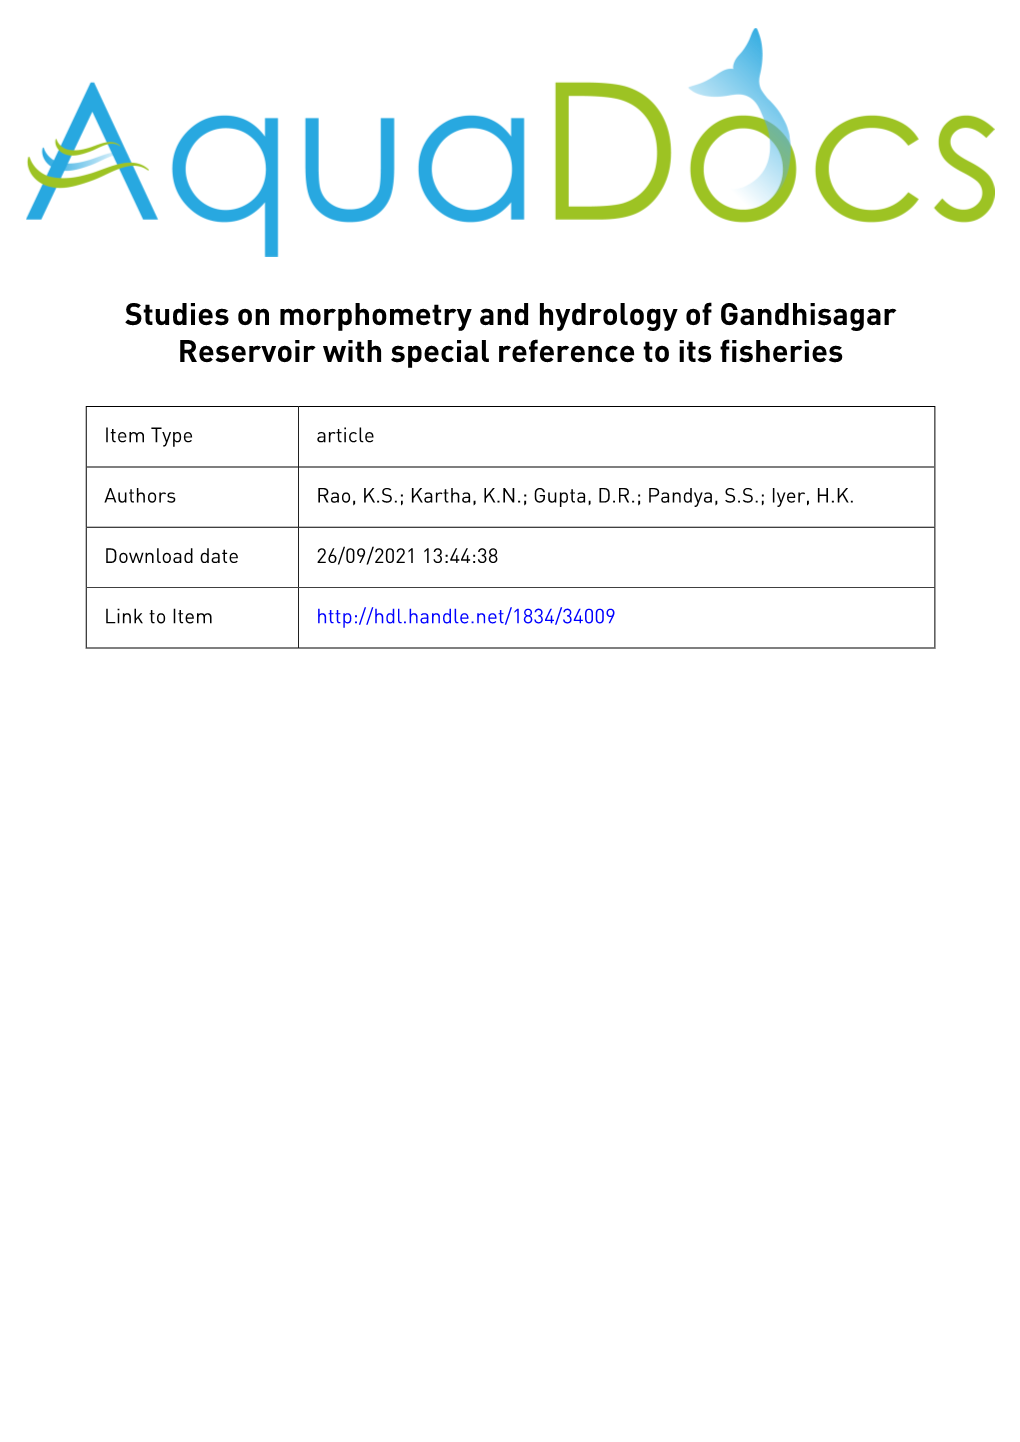 Studies on Morphometry and Hydrology of Gandhisagar Reservoir with Special Reference to Its Fisheries